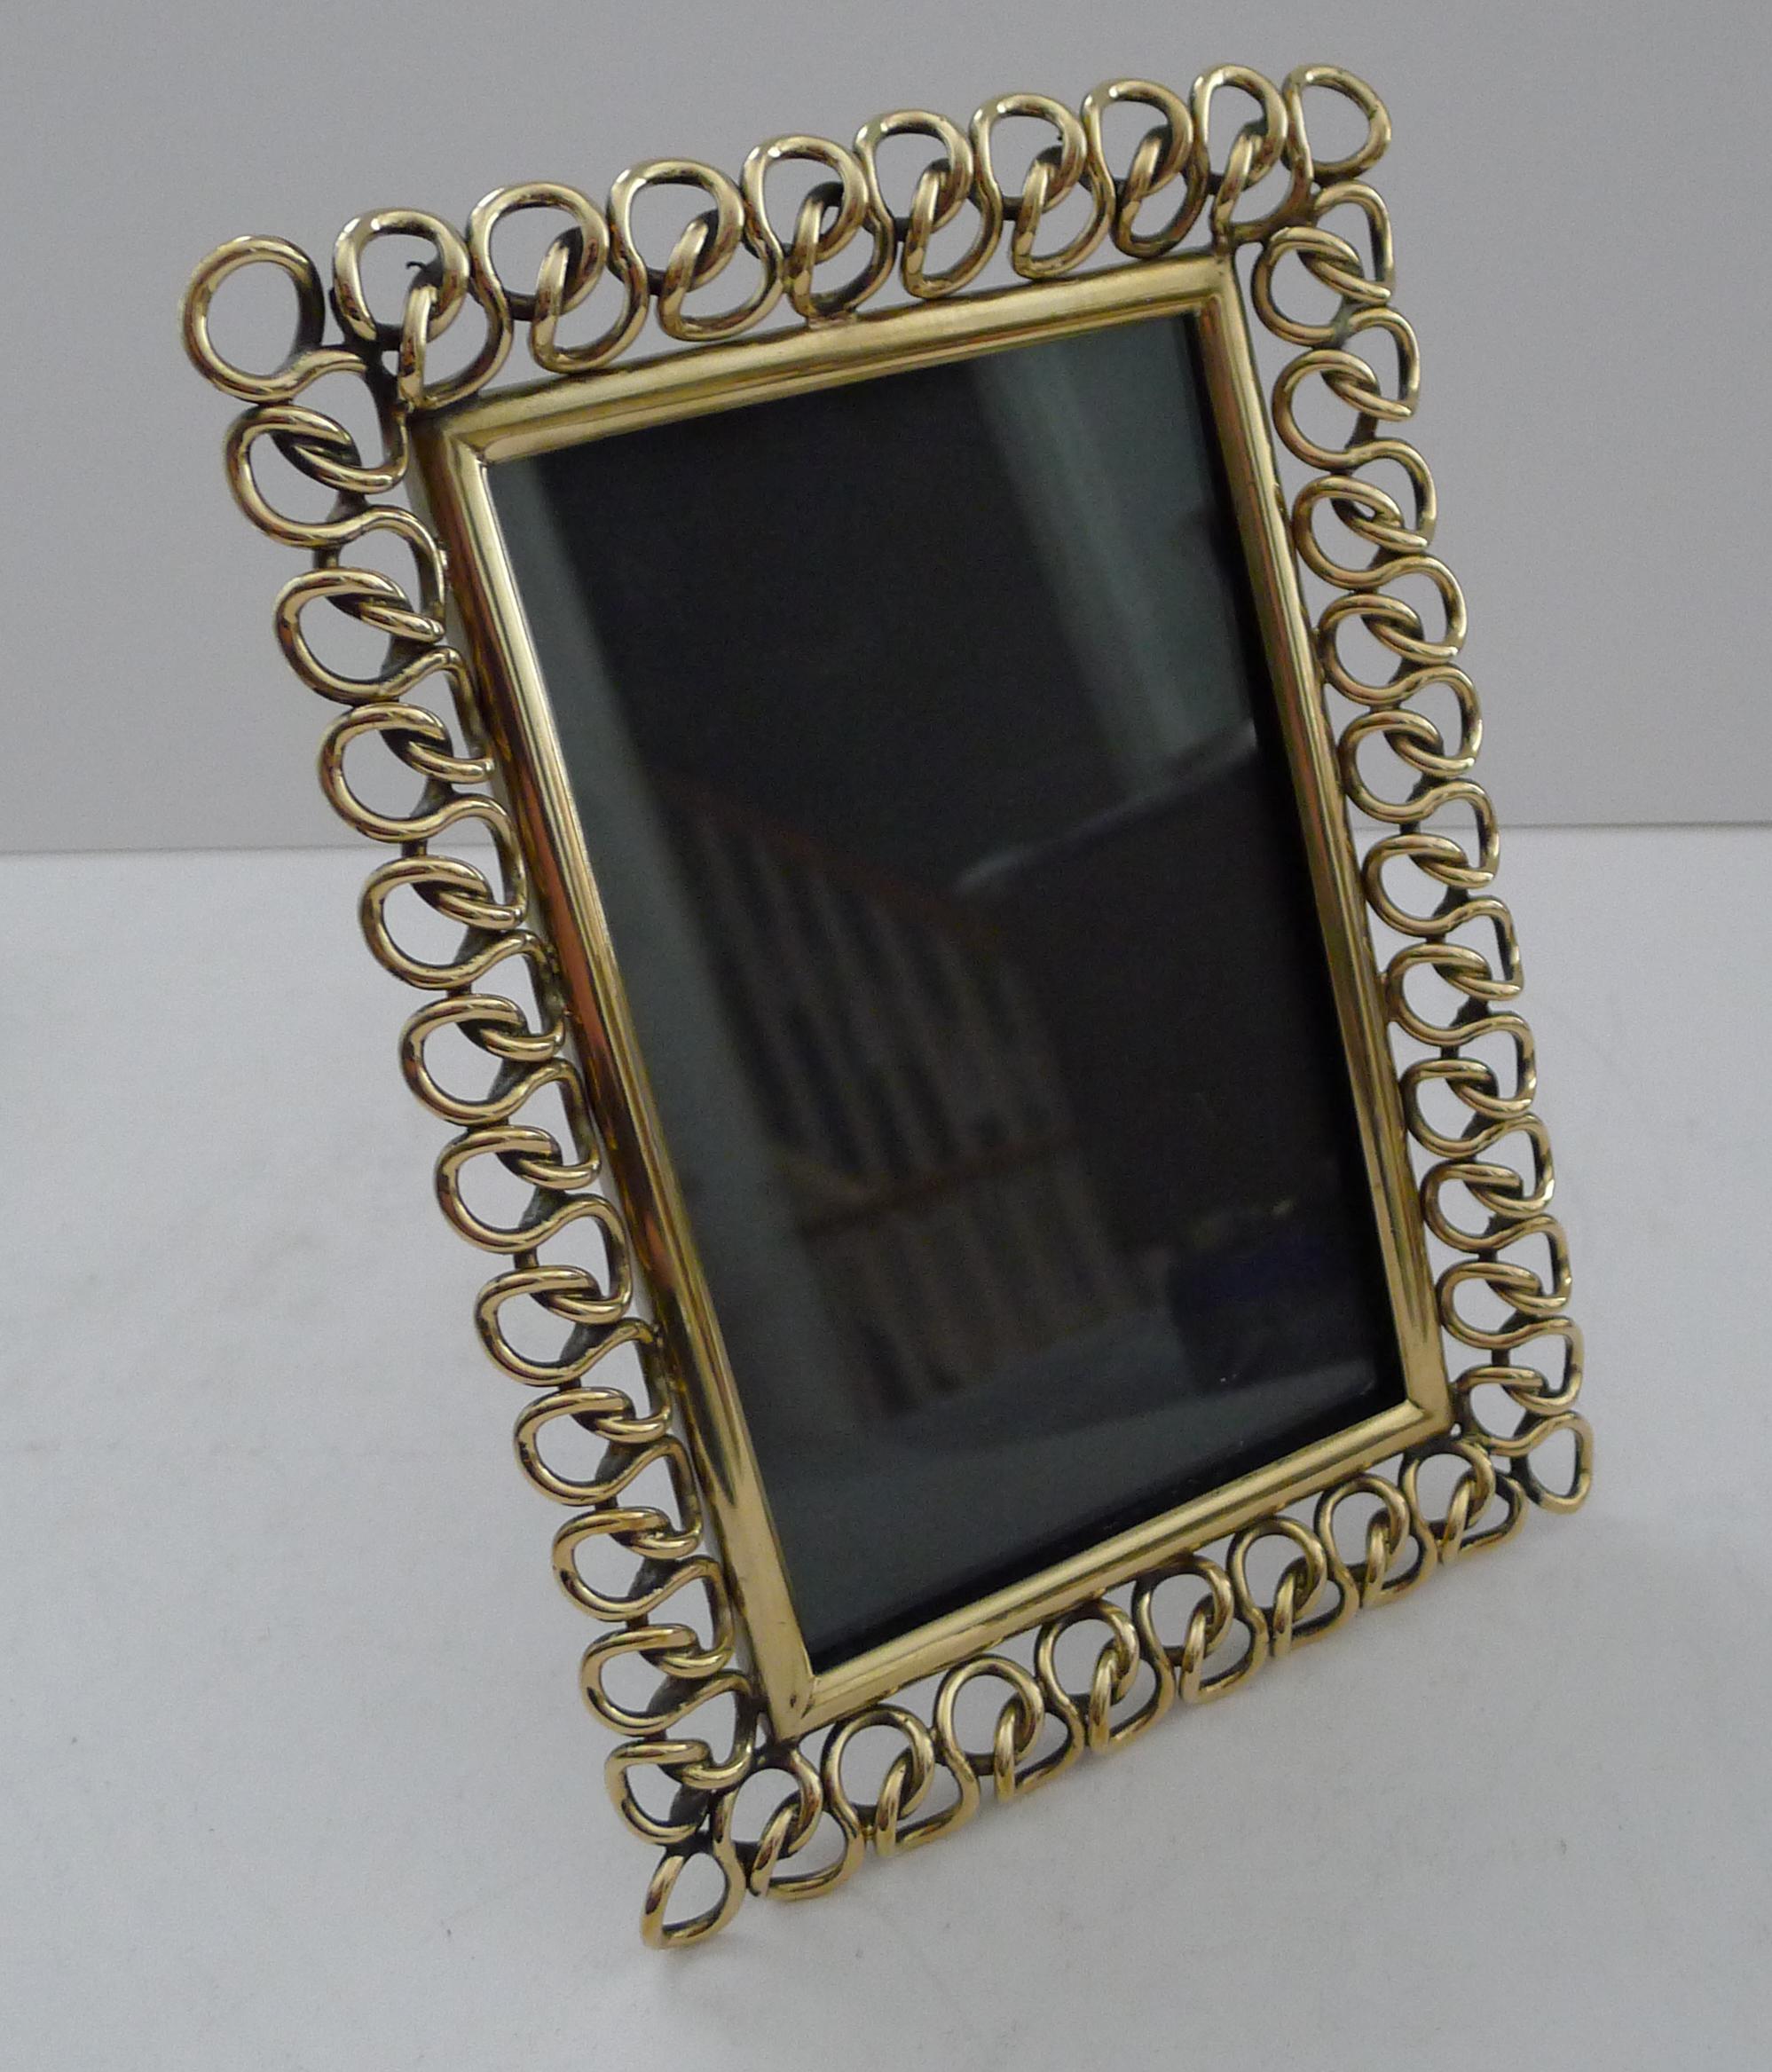 A wonderful, unusual and highly decorative brass ring frame made from heavy cast brass dating to the late Victorian era, c.1890.

The back incorporates the original folding easel stand.

Excellent condition measuring 8 1/2